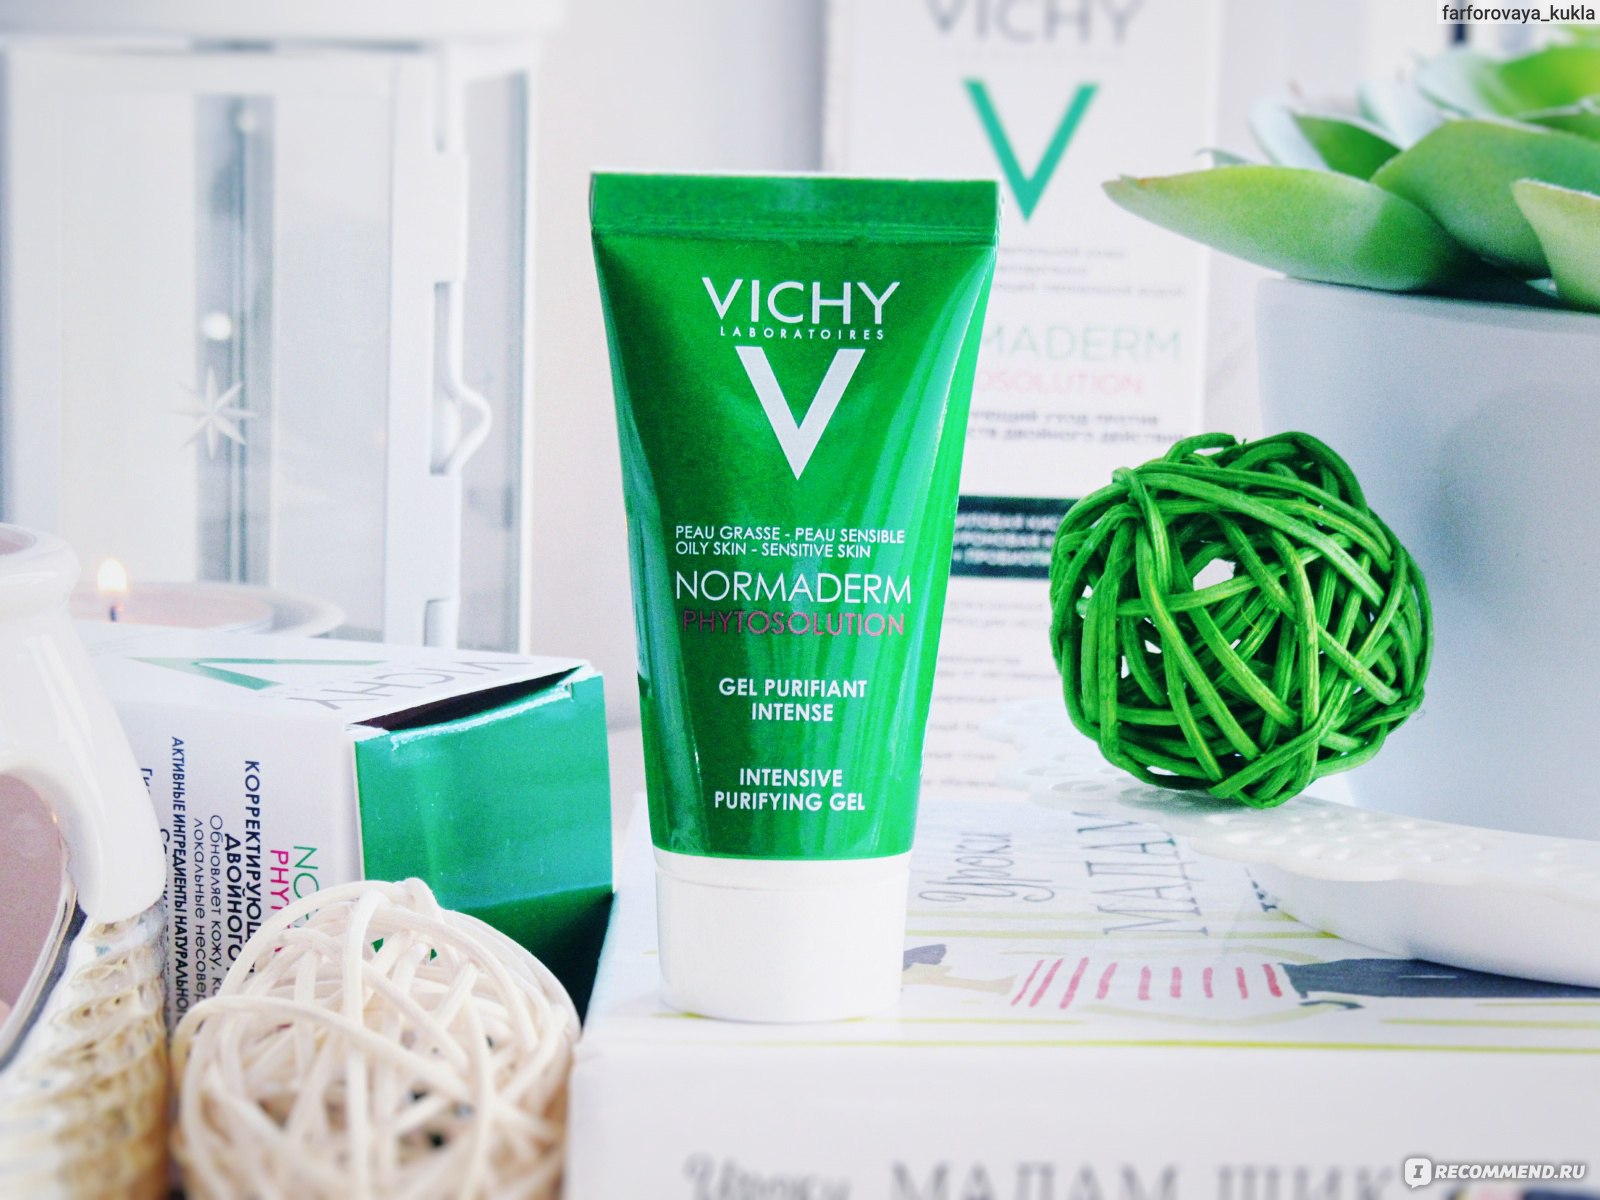 Vichy normaderm phytosolution intensive purifying gel. Виши умывалка Normaderm. Vichy Нормадерм гель. Vichy Normaderm phytosolution. Vichy Normaderm phytosolution Gel.